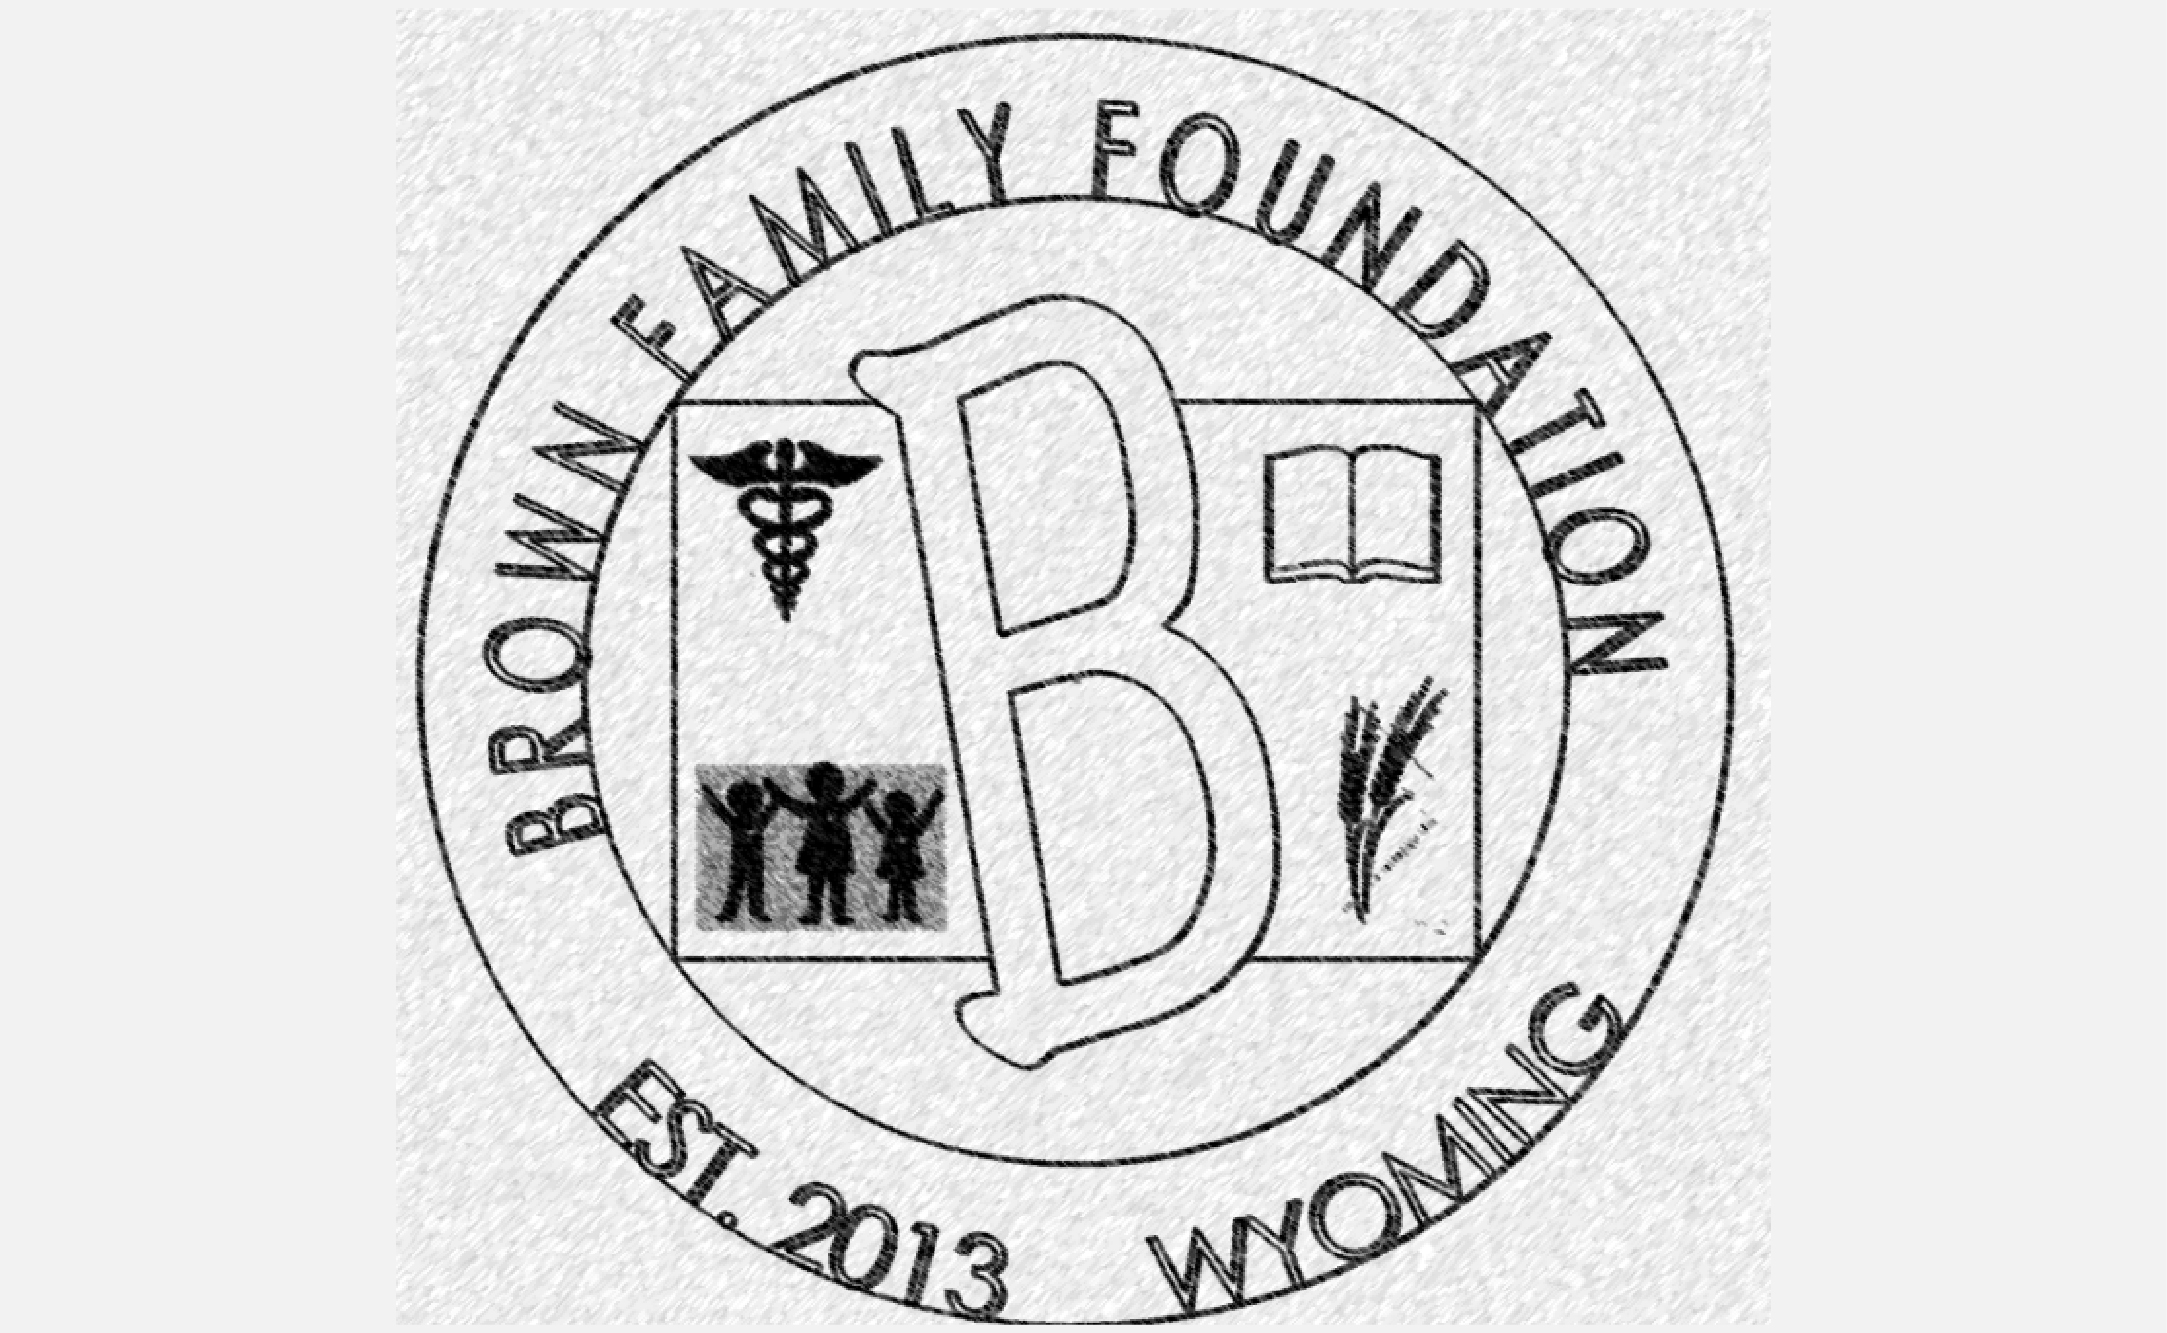 A. Brown Family Foundation (Presenting)